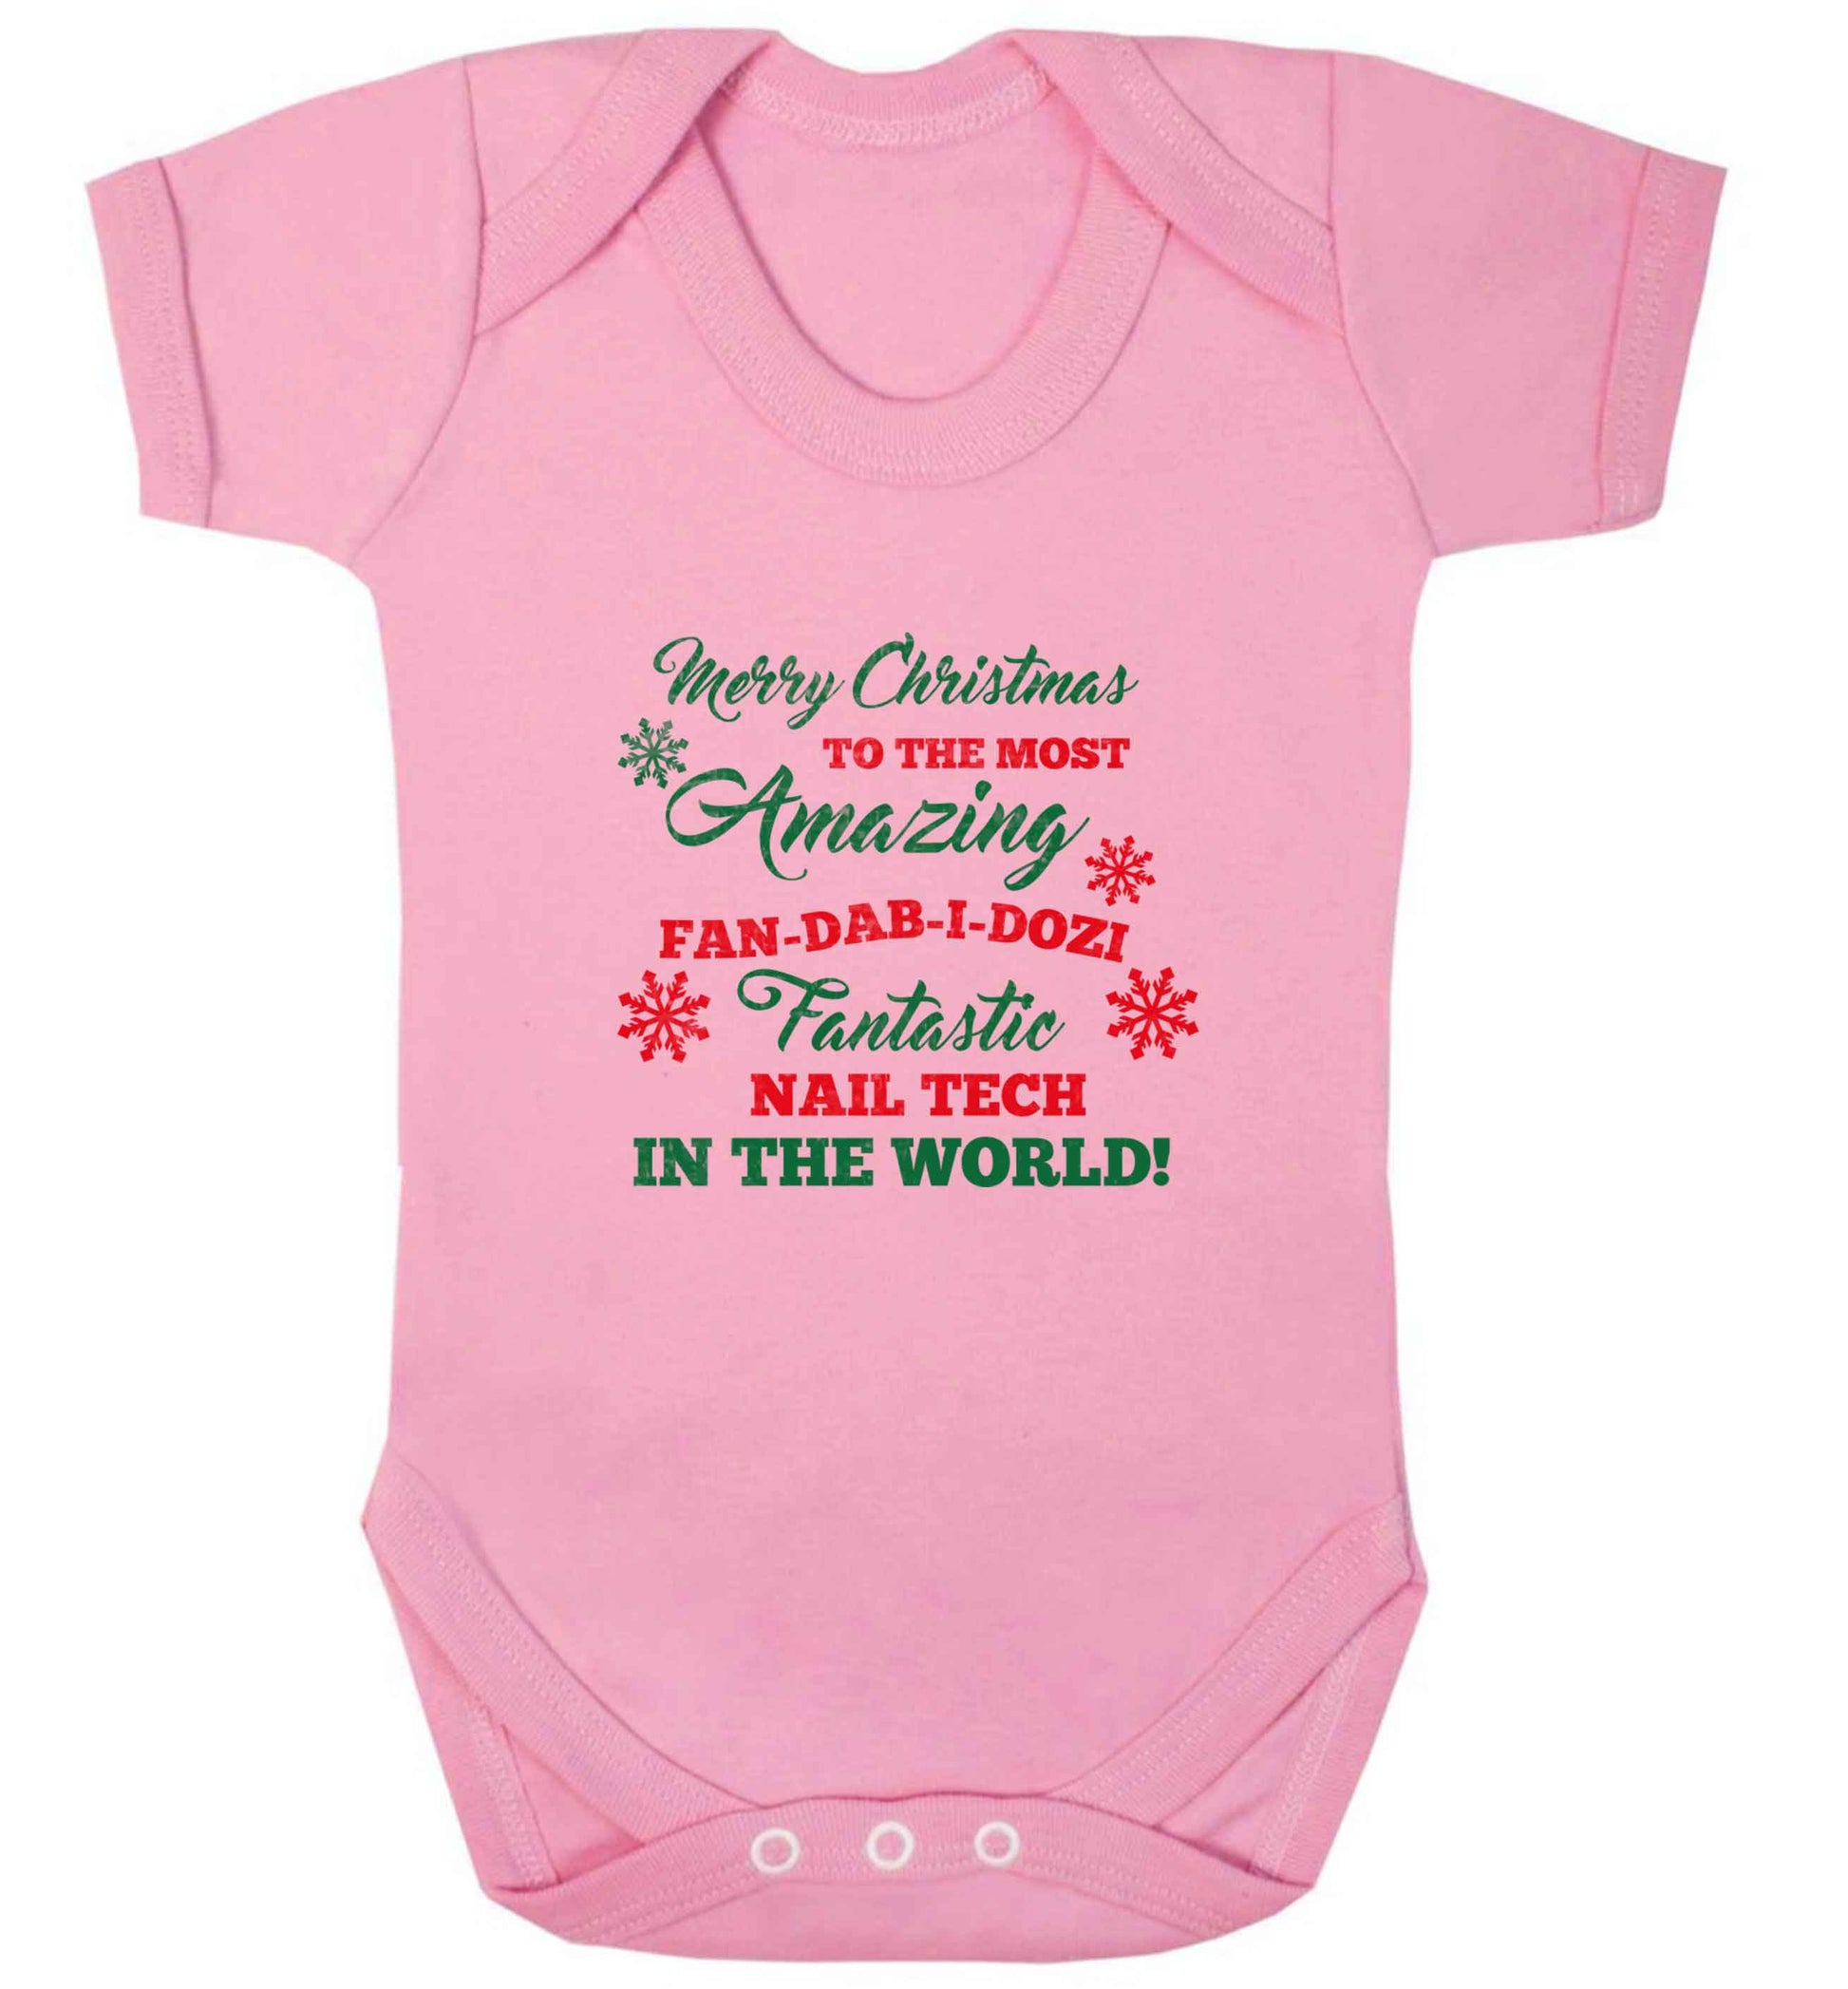 Merry Christmas to the most amazing fan-dab-i-dozi fantasic nail technician in the world baby vest pale pink 18-24 months